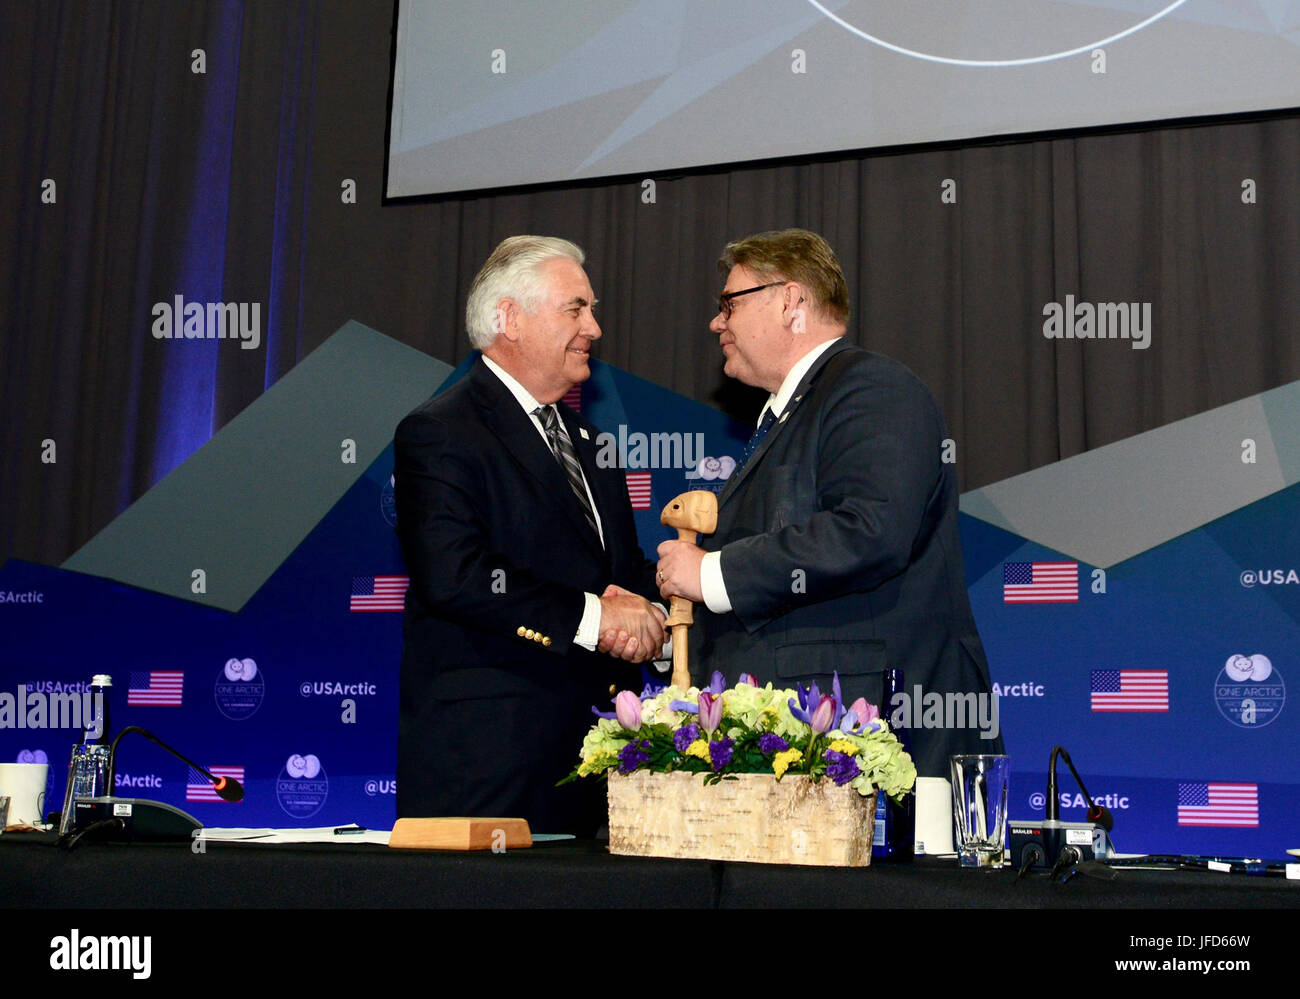 U.S. Secretary of State Rex Tillerson passes the Chairmanship gavel to Finnish Foreign Minister Timo Soini during the 10th Arctic Council Ministerial Meeting in Fairbanks, Alaska, on May 11, 2017. [U.S. Air Force photo / ] Stock Photo